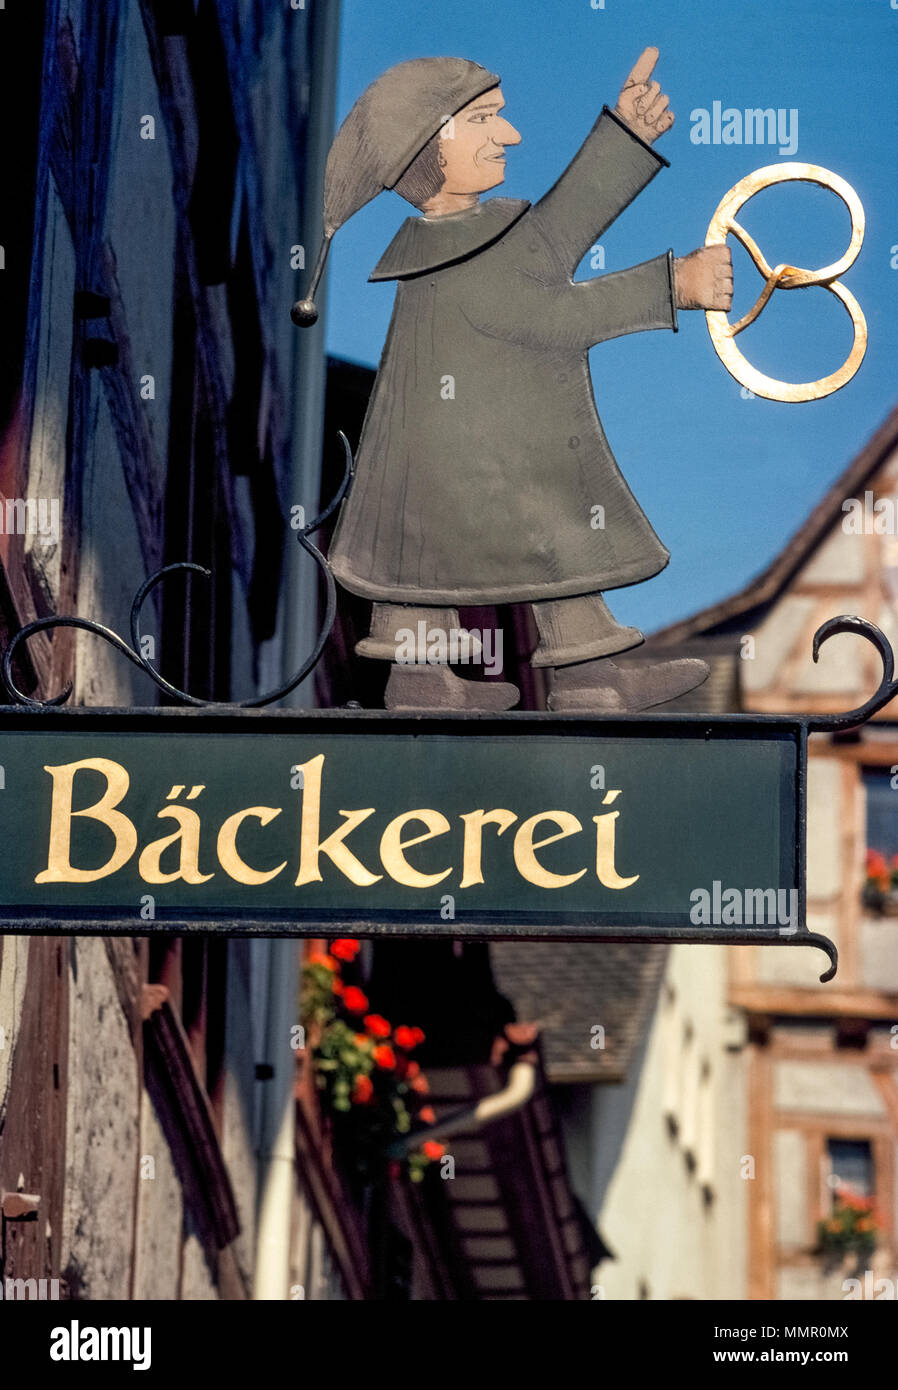 An old-fashioned outdoor guild sign that juts from a storefront depicts a baker holding a pretzel that advertises a bakery (backerei) in Stein am Rhein, Canton of Schaffhausen, Switzerland. The pretzel has been a traditional symbol for bakeries since medieval times and is thought to represent arms crossed in prayer. Stock Photo